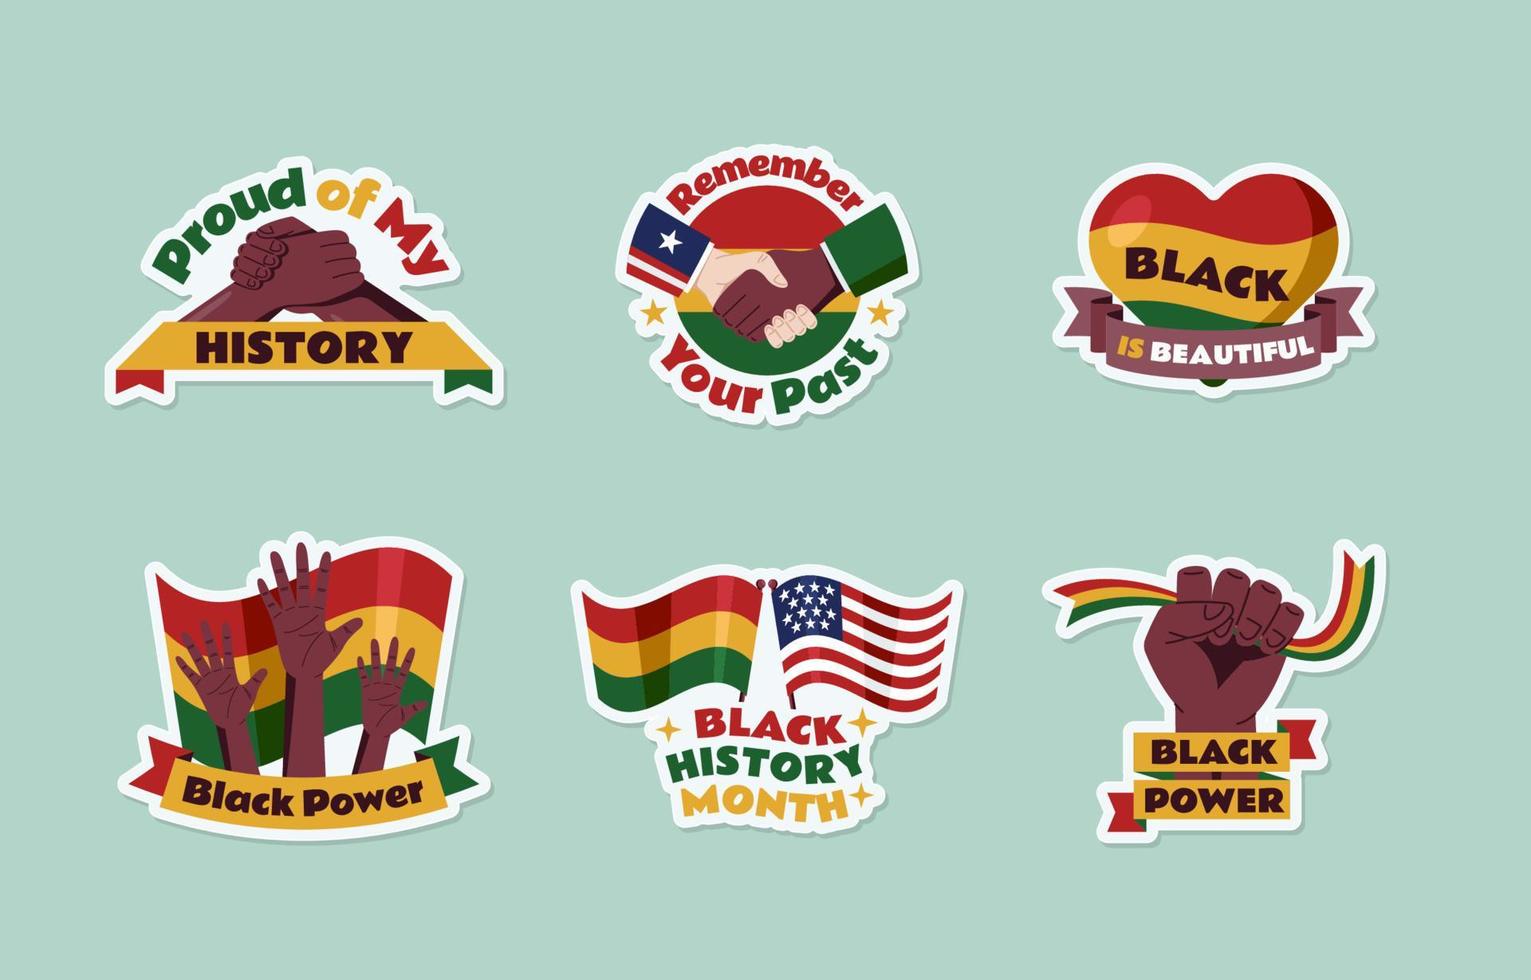 Black History Month Greeting Stickers vector